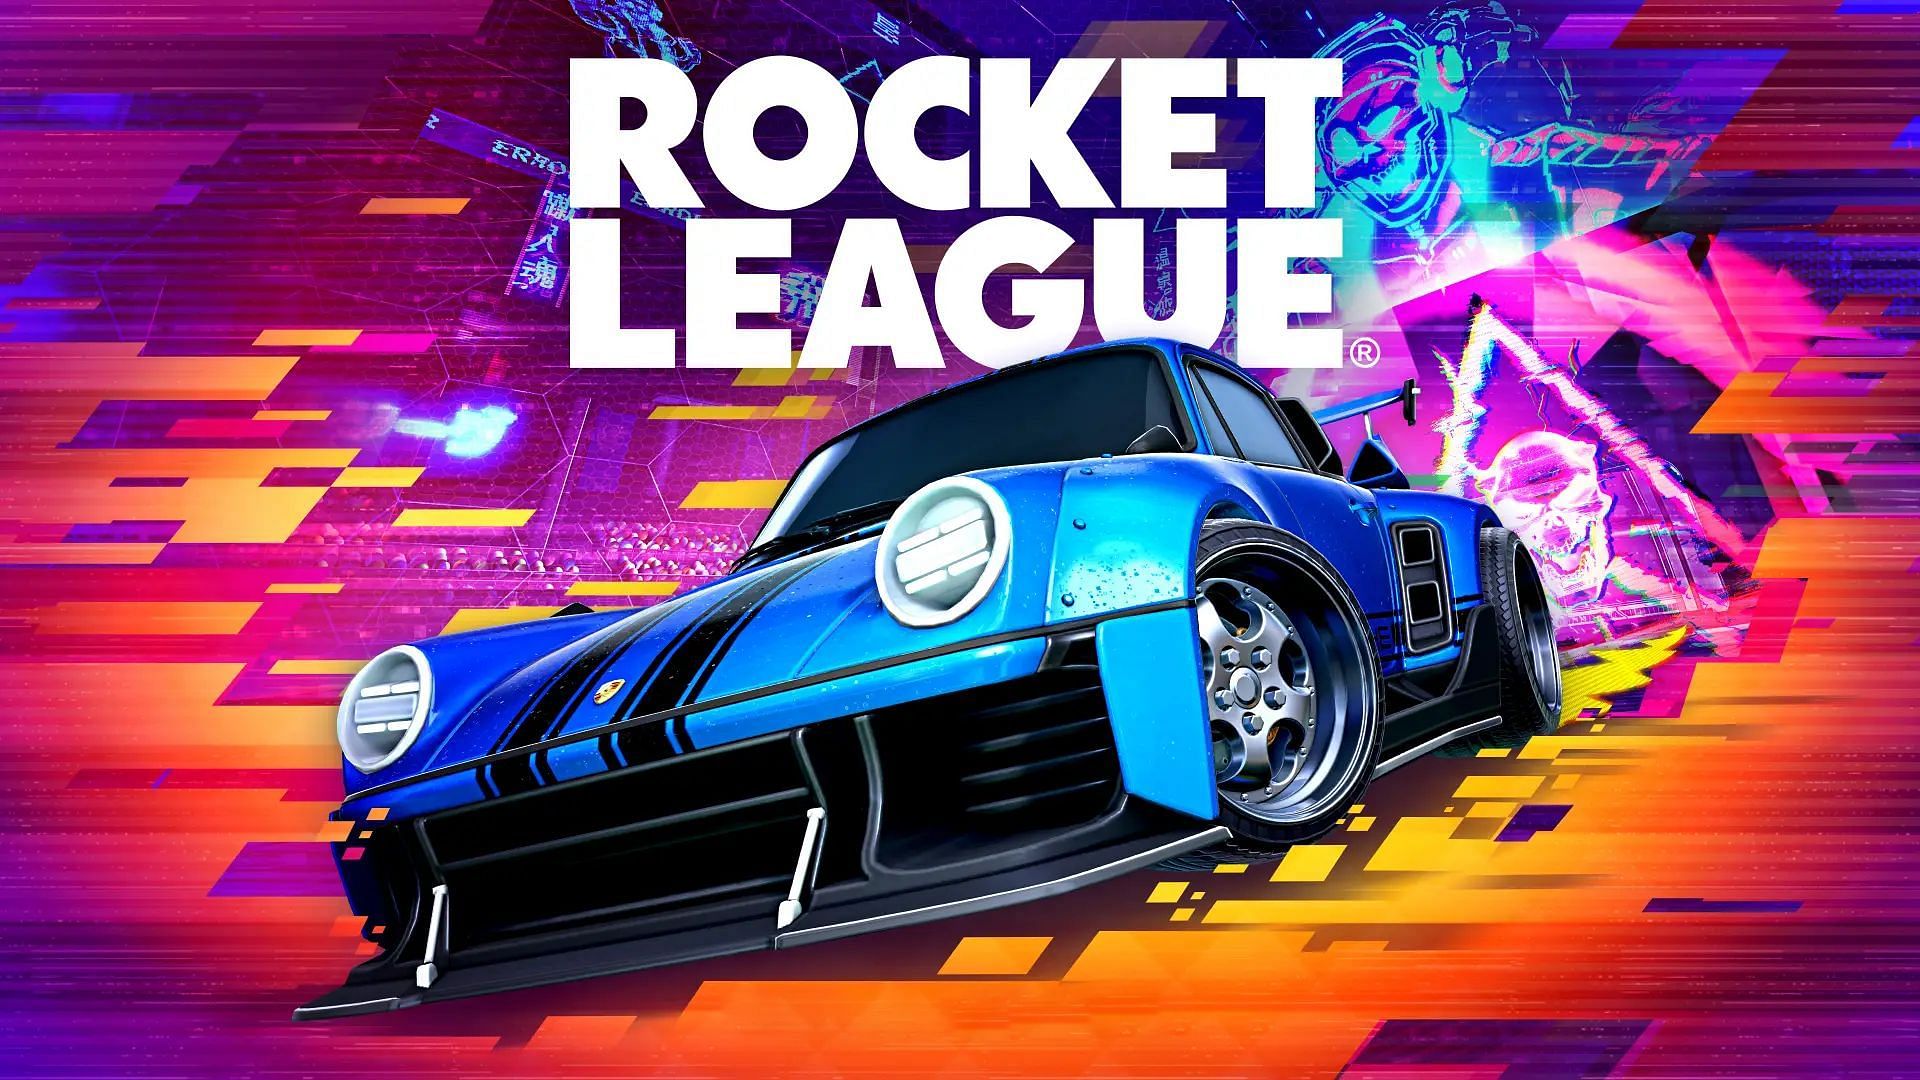 Rocket League v2.32 official patch notes Season 12 live, Neo Tokyo (Hacked) Arena added, new Porsche 911 Turbo vehicle, and more